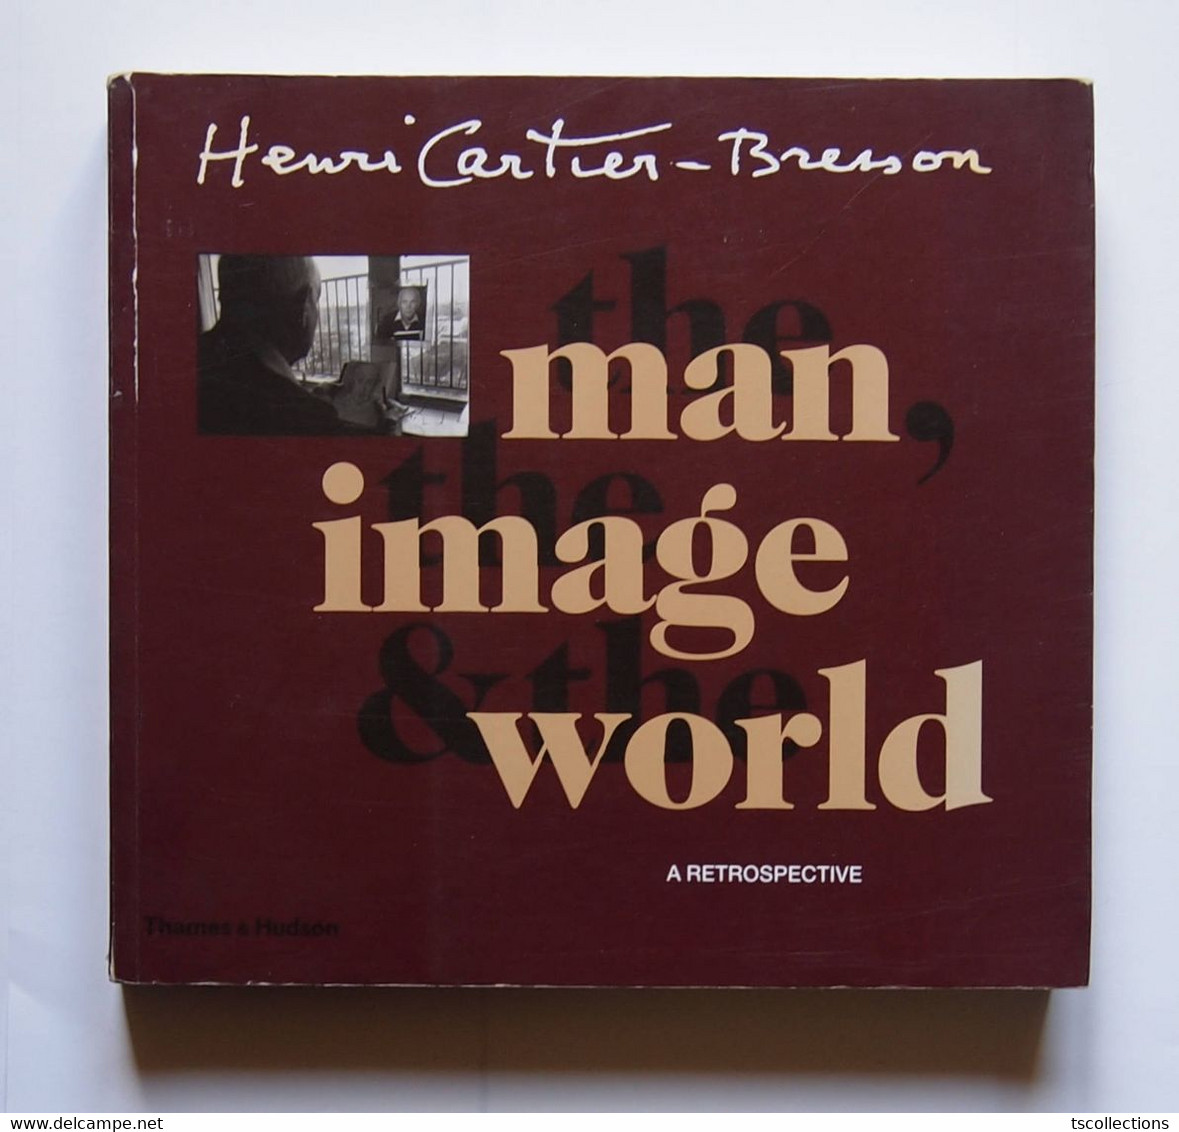 Henri Cartier-Bresson The Man, The Image And The World: A Retrospective - Photography